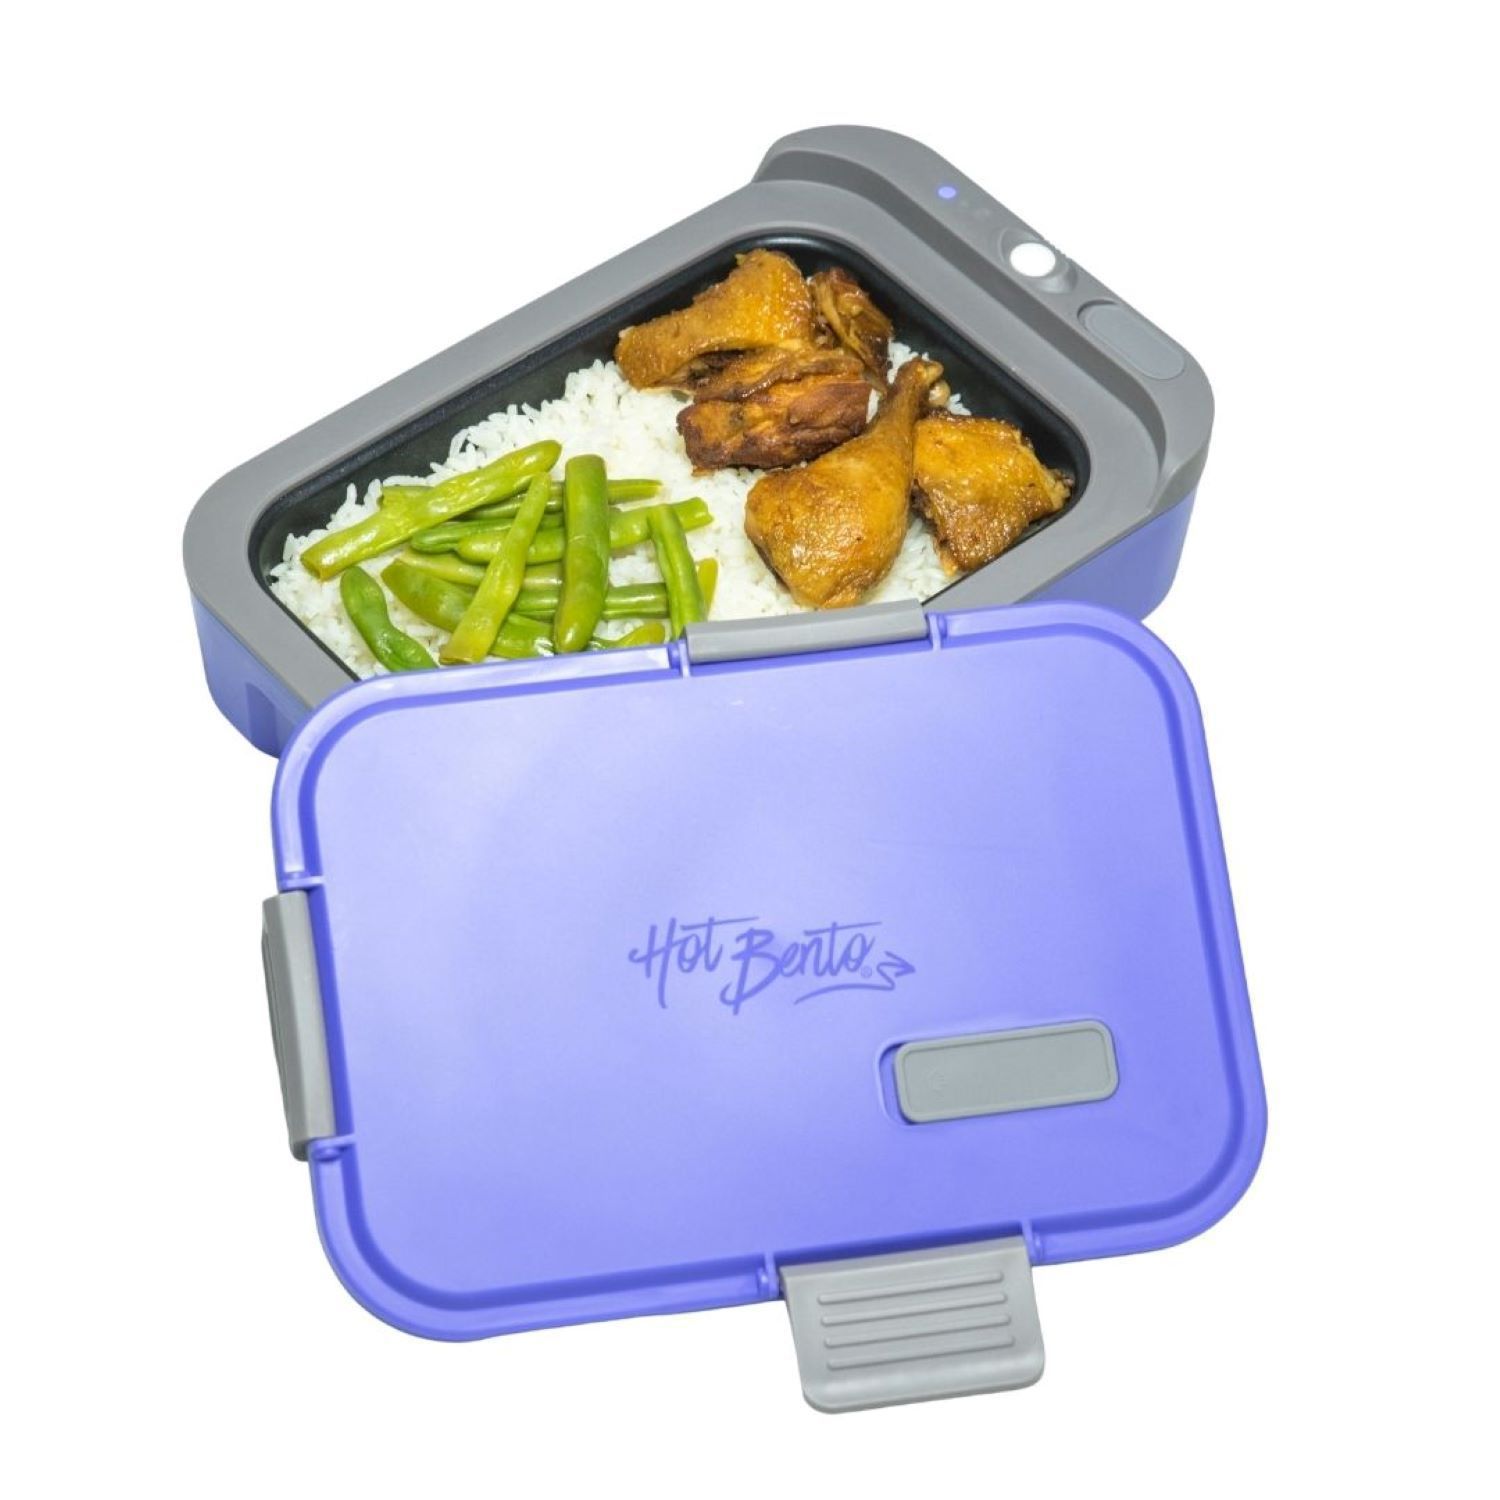 2 Crock Pot Electric Lunch Box, Travel Food Warmer for Sale in